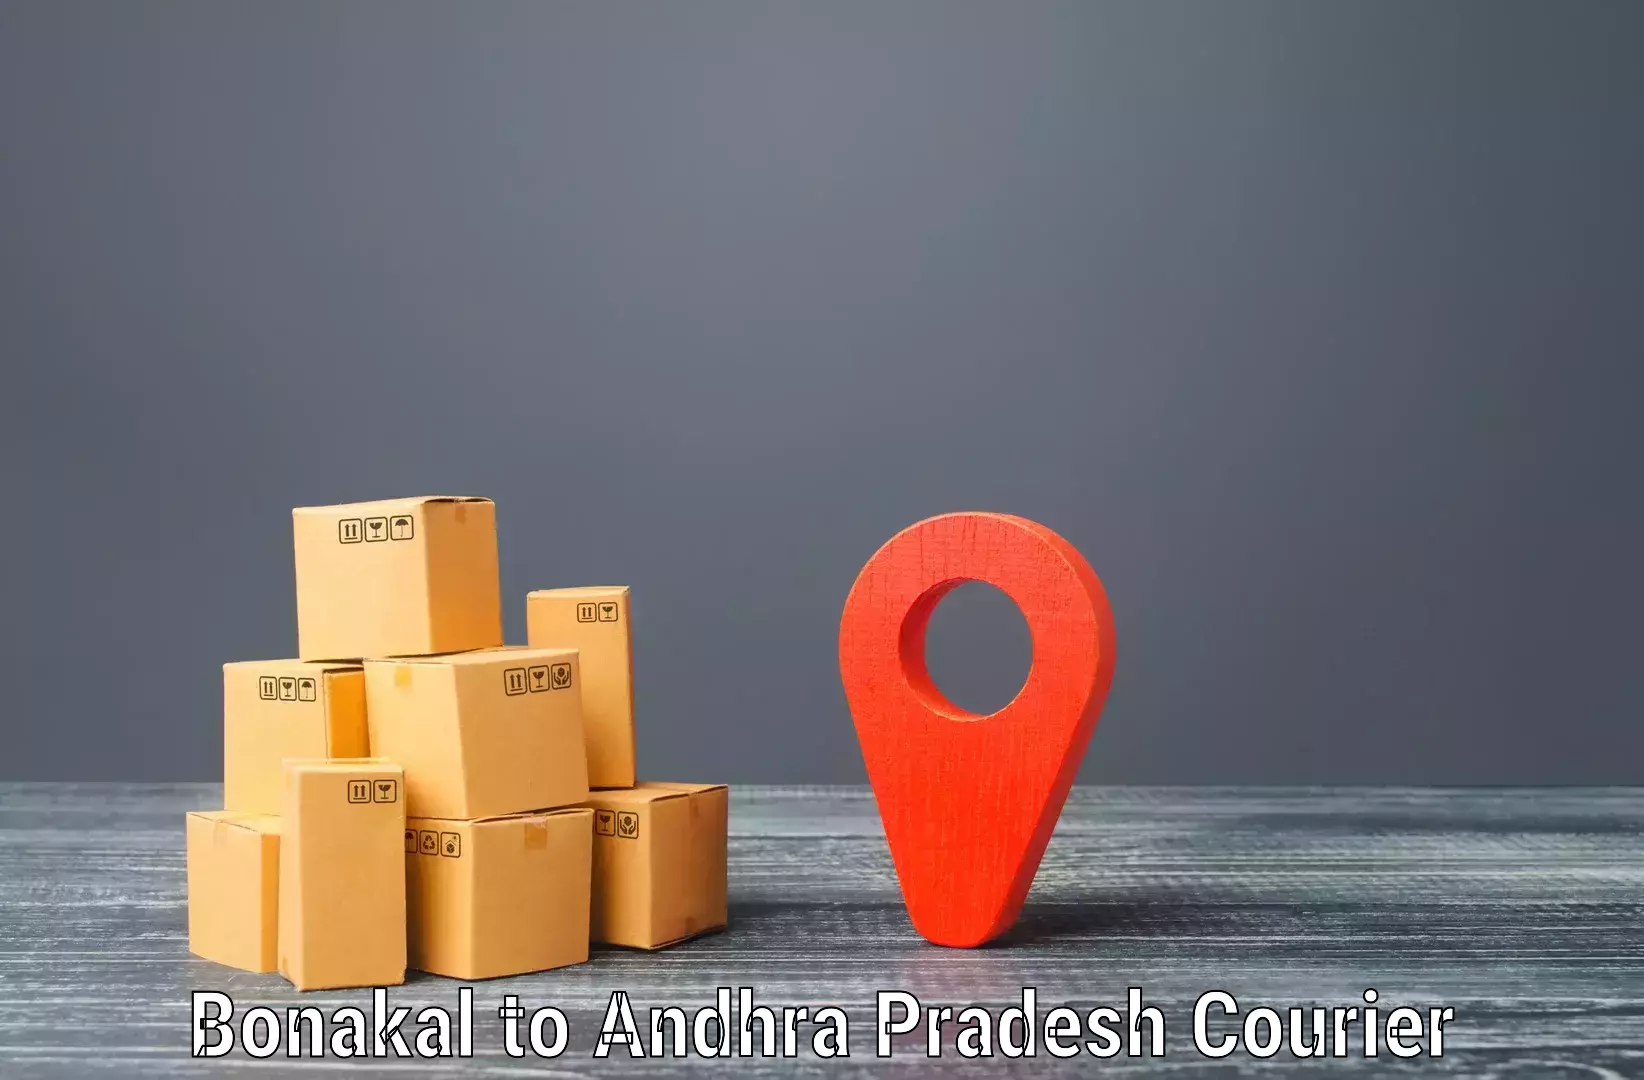 Global shipping solutions in Bonakal to Narasaraopet